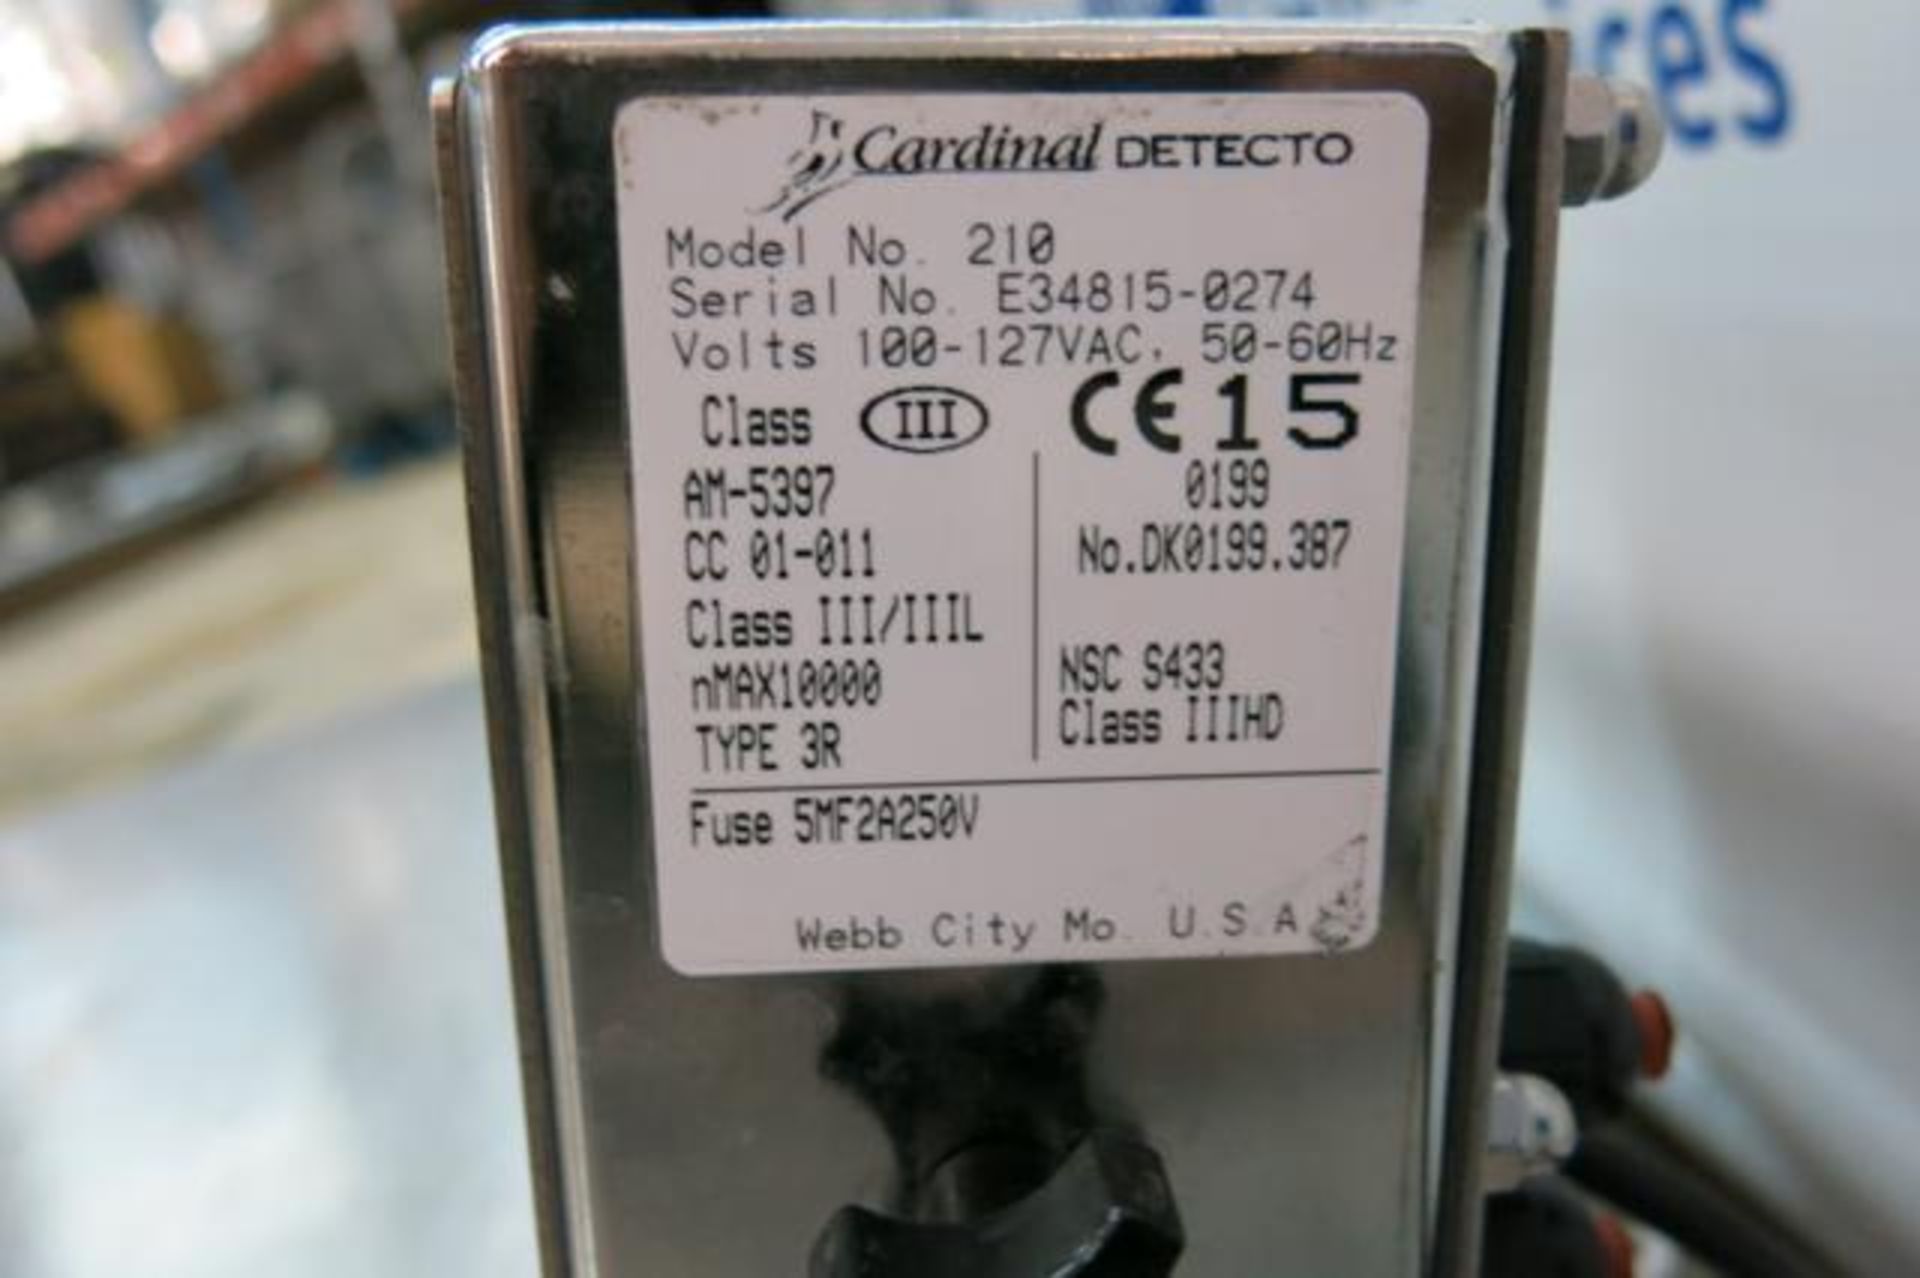 STAINLESS STEEL FLOOR SCALE WITH CARDINAL, STORM 205, DIGITAL WEIGHT INDICATOR, S/N E34815-0274 - Image 3 of 3